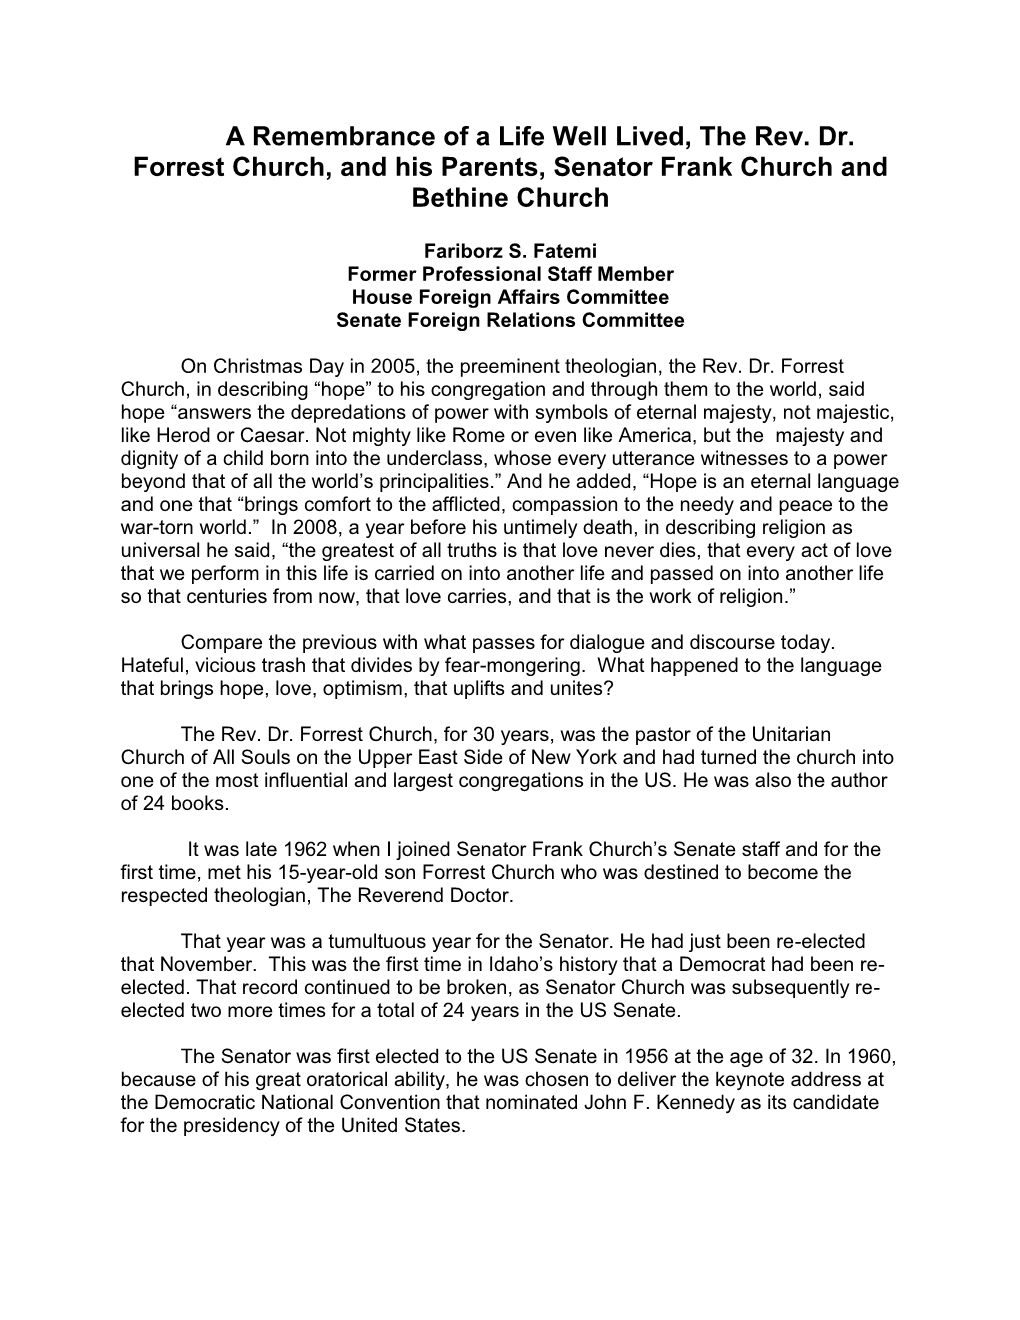 A Remembrance of a Life Well Lived, the Rev. Dr. Forrest Church, and His Parents, Senator Frank Church and Bethine Church